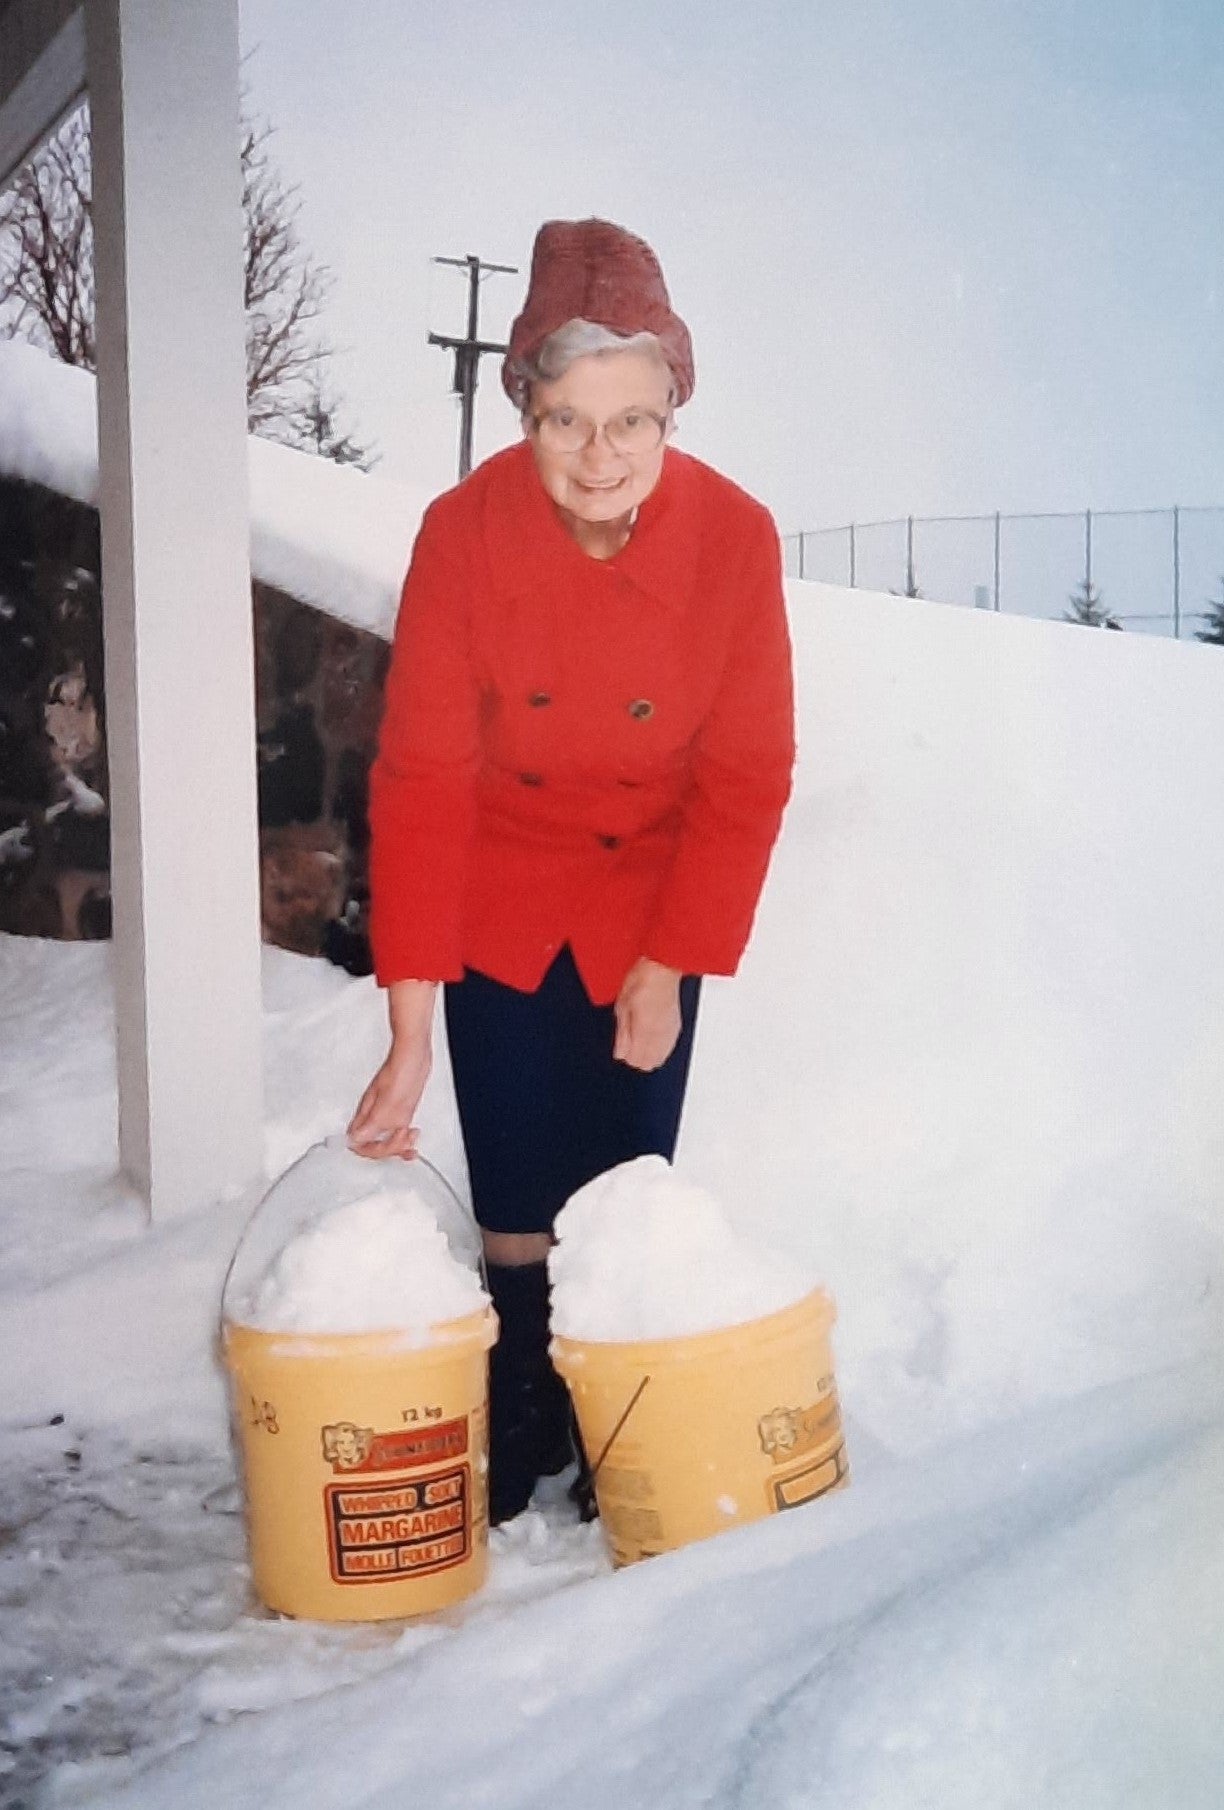 DOrothy wears a red jacket, carrying yellow buckets of snow